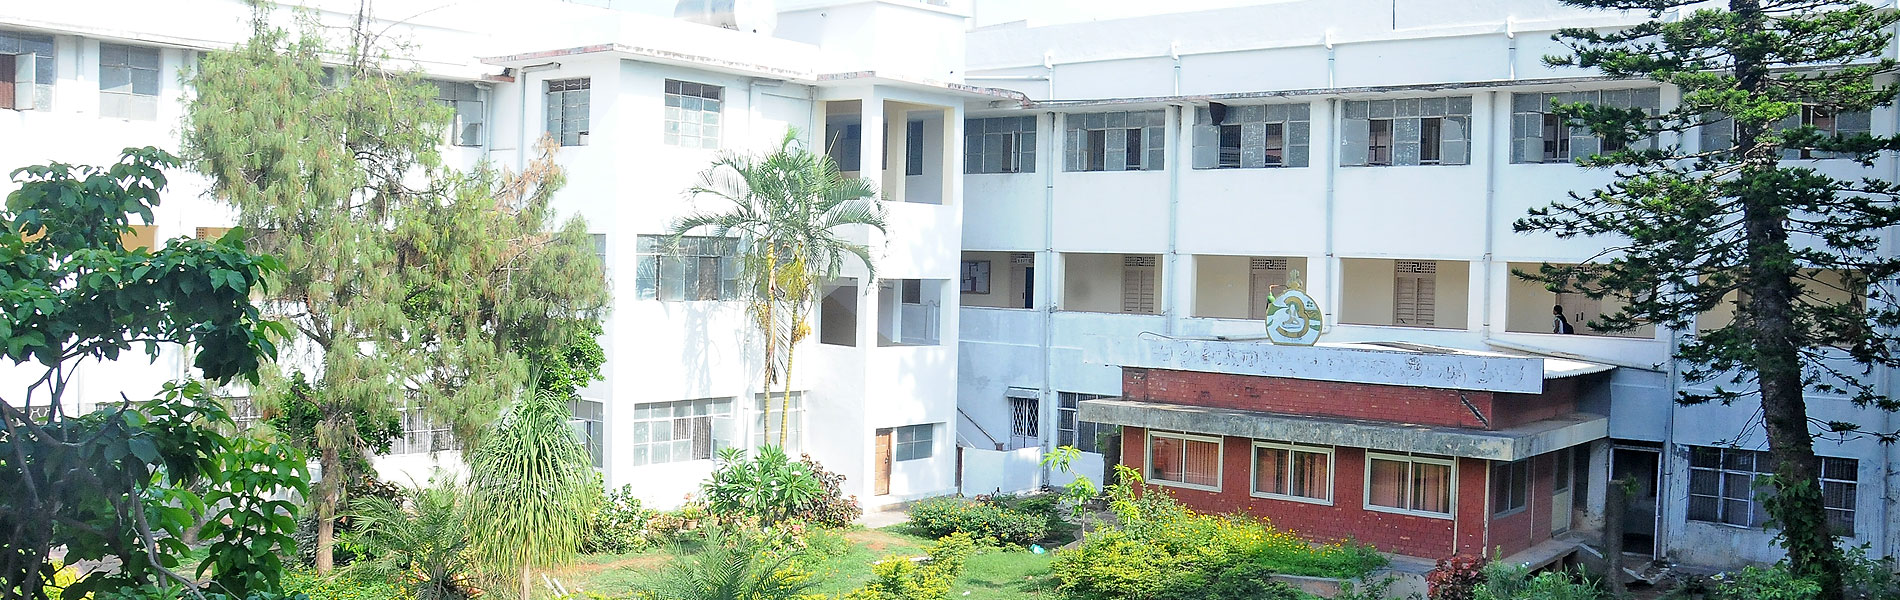 J.S.S College of Physiotherapy Image